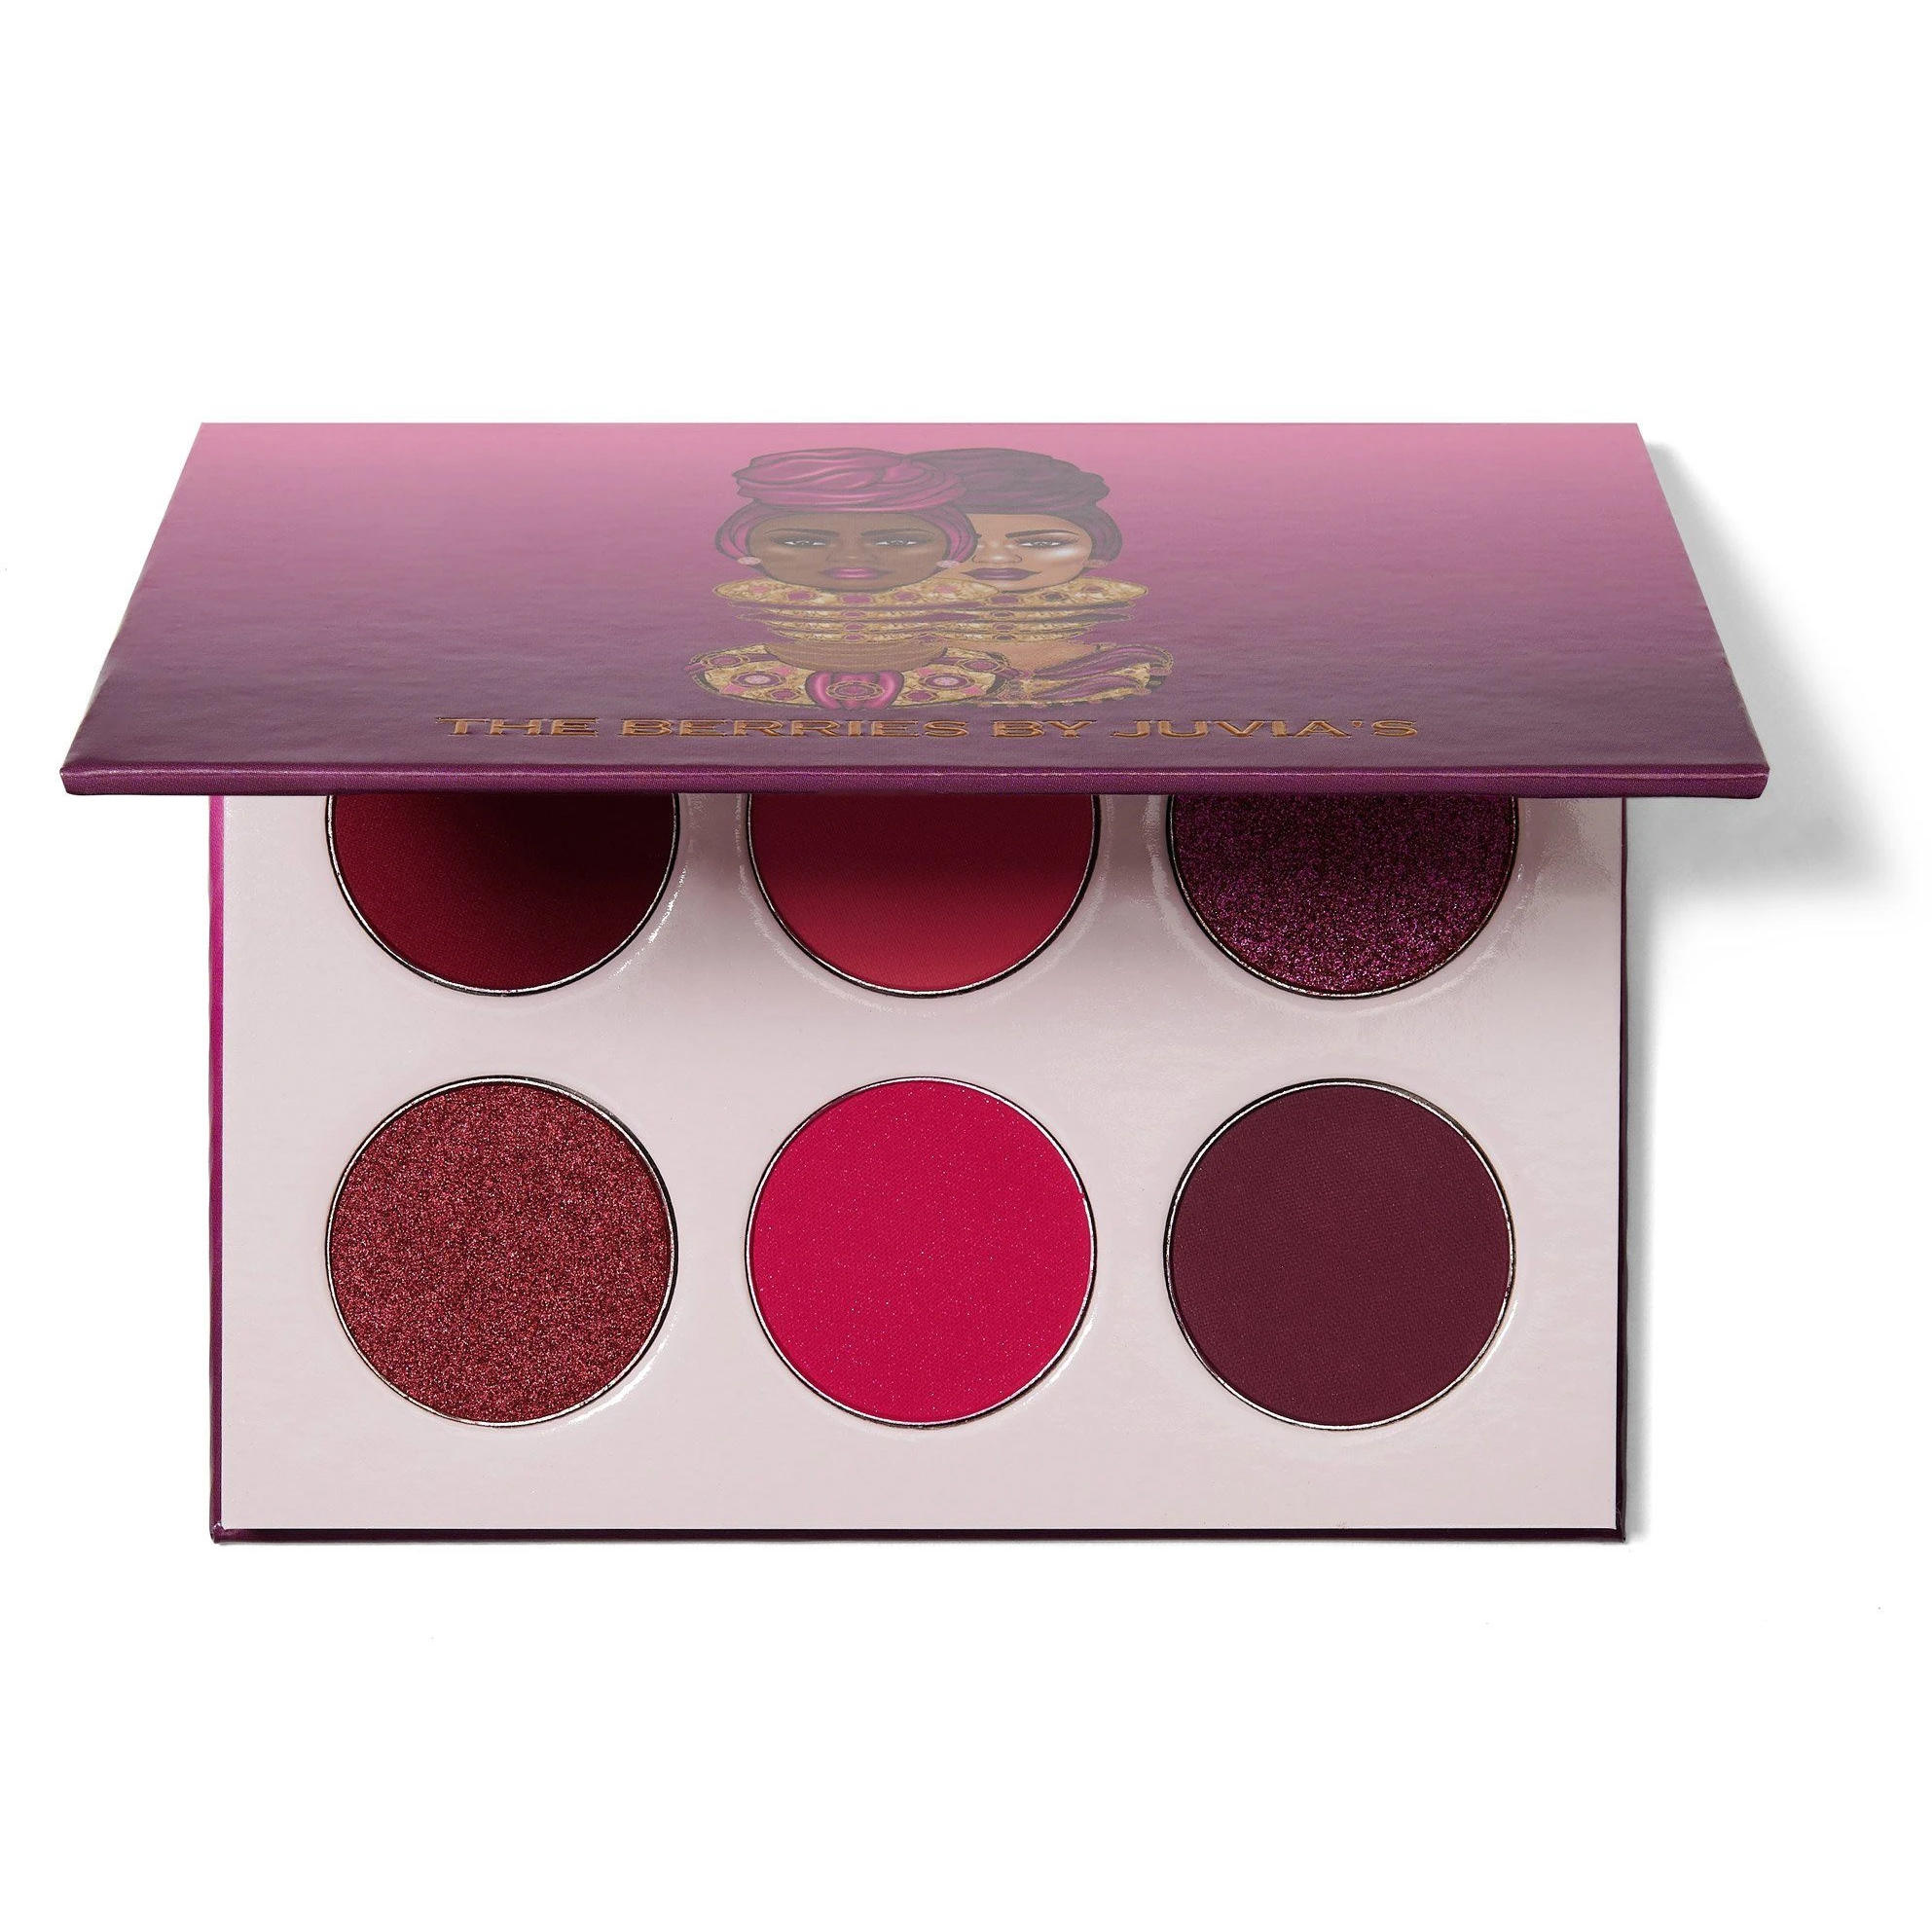 Juvia's Place The Berries Palette